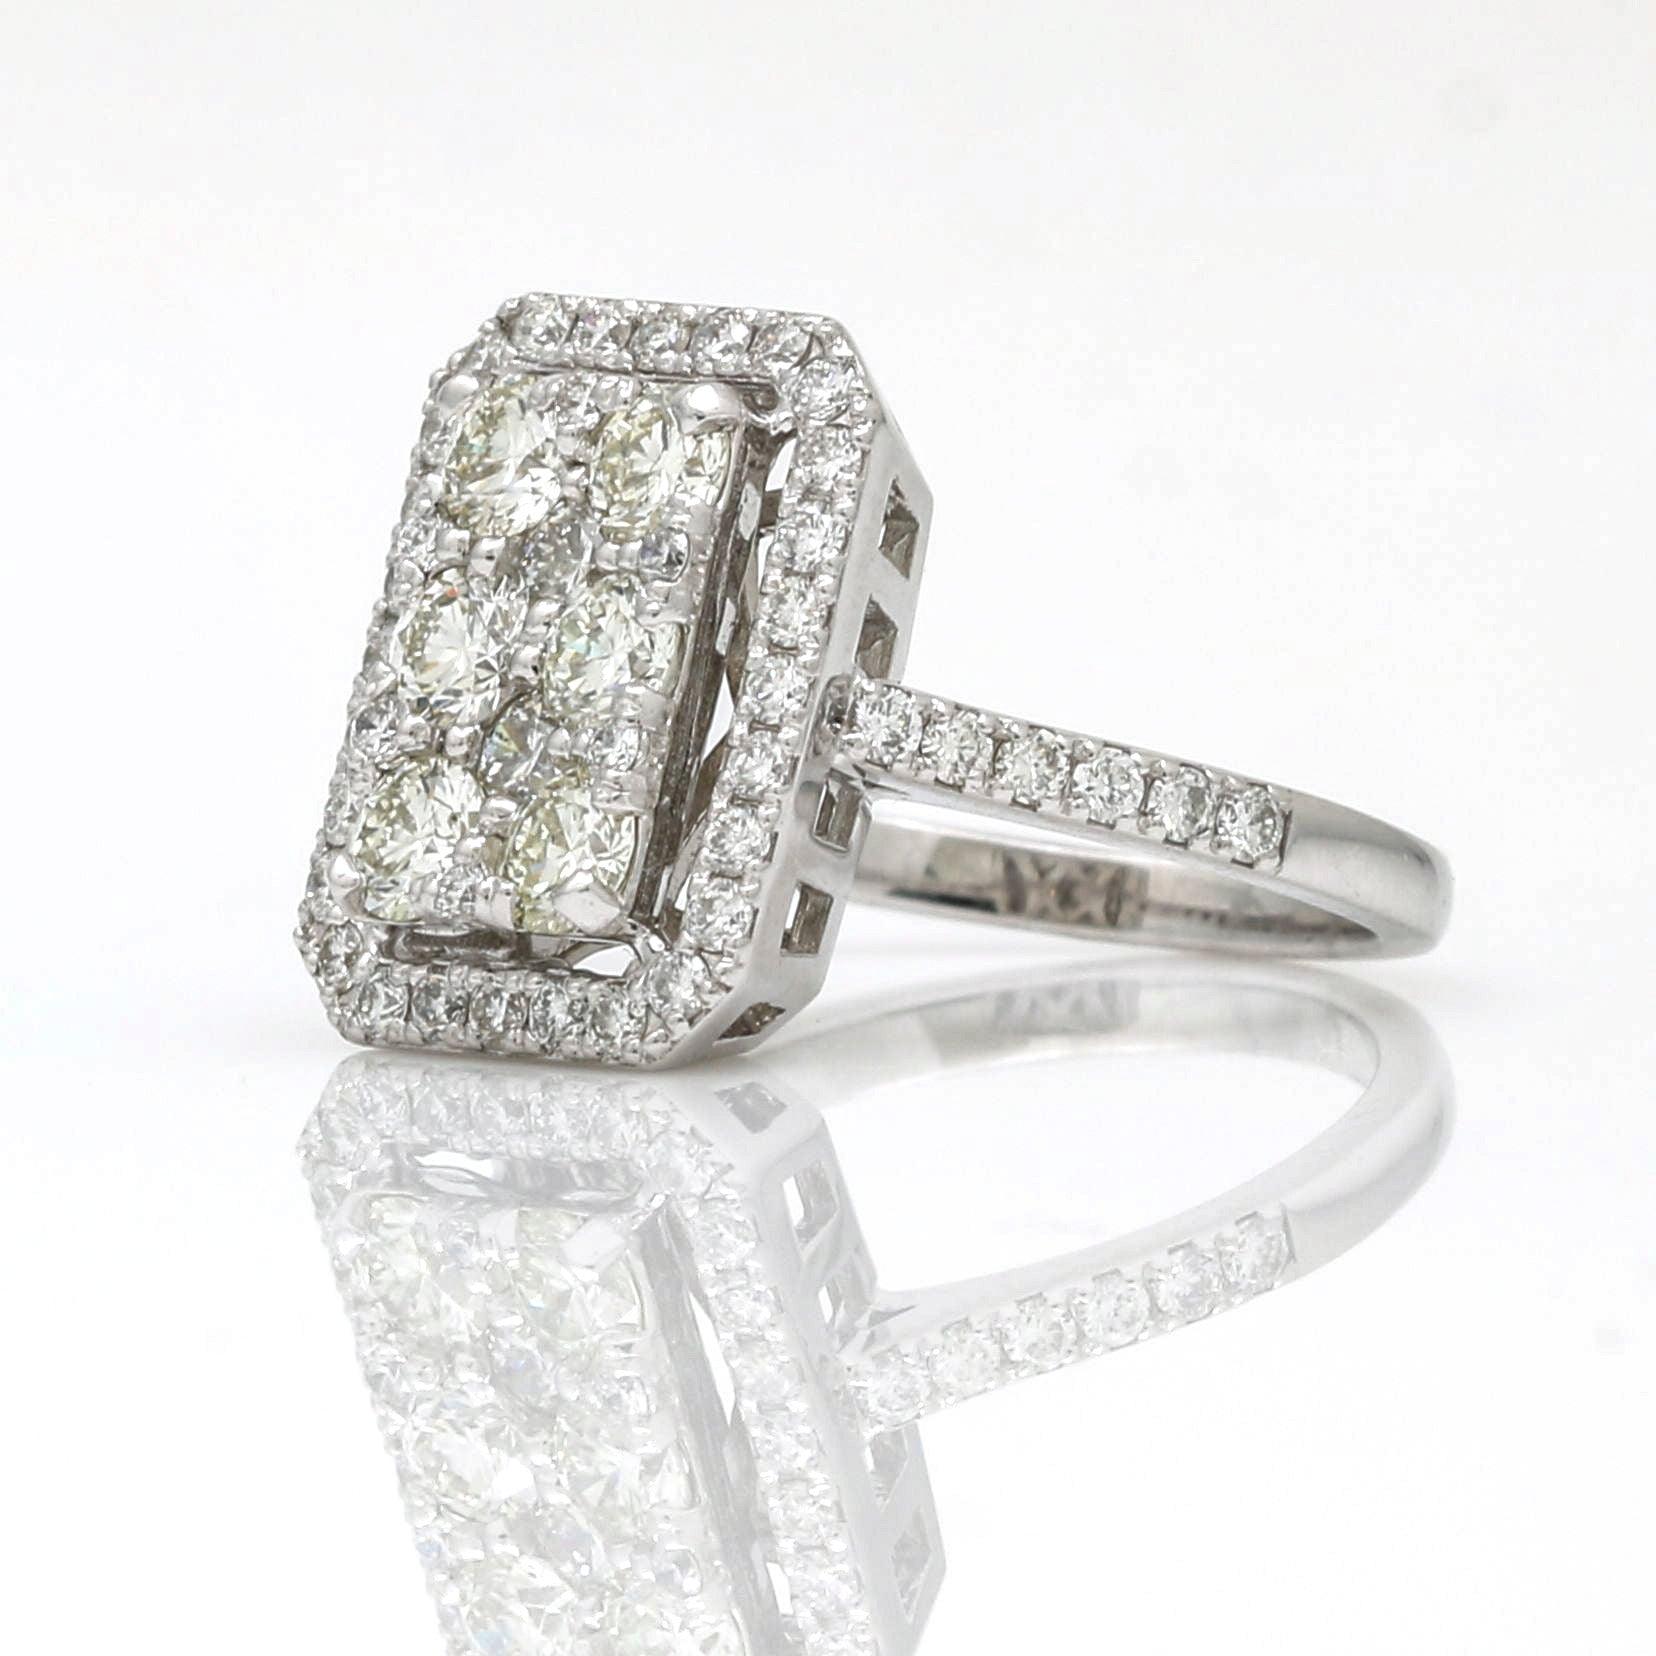 Women's Diamond Cocktail Ring in 14k White Gold 1.50 cttw - 31 Jewels Inc.